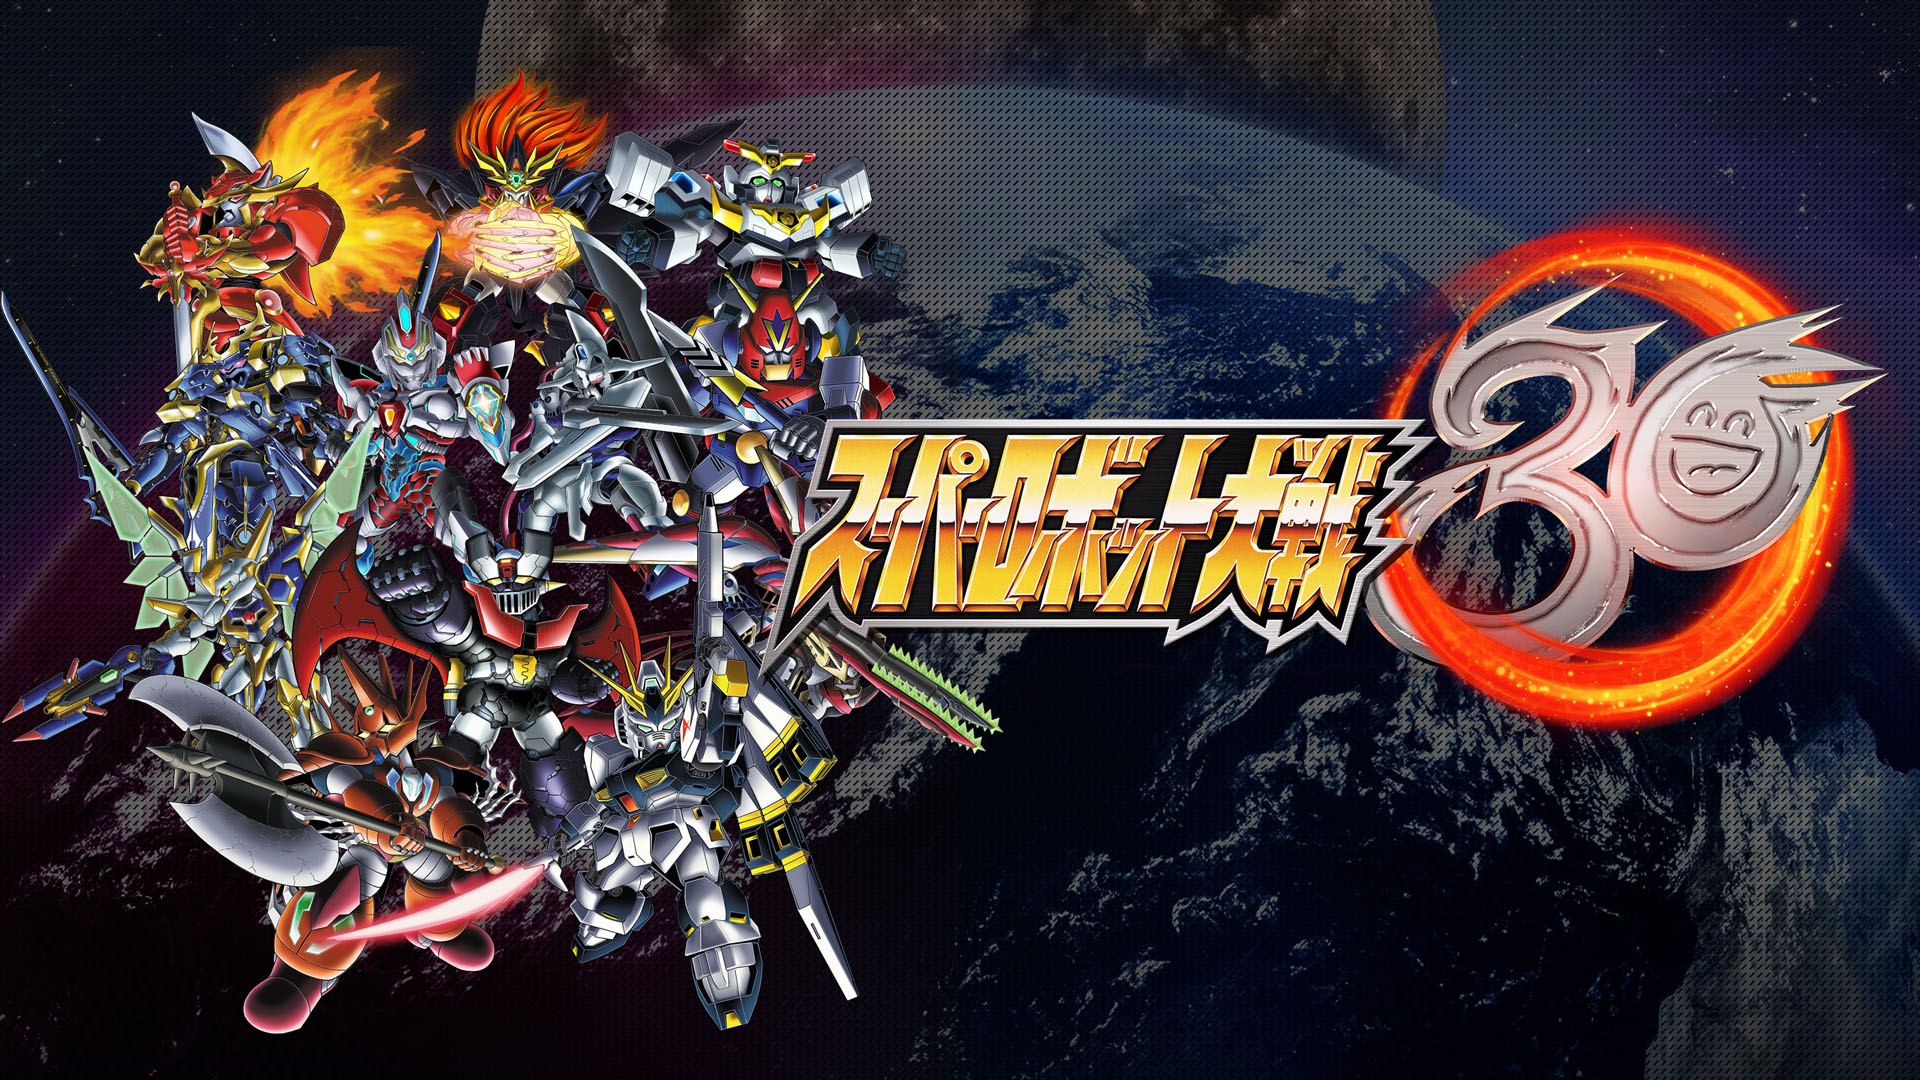 Super Robot Wars 30 launches October 28 in Japan and Asia